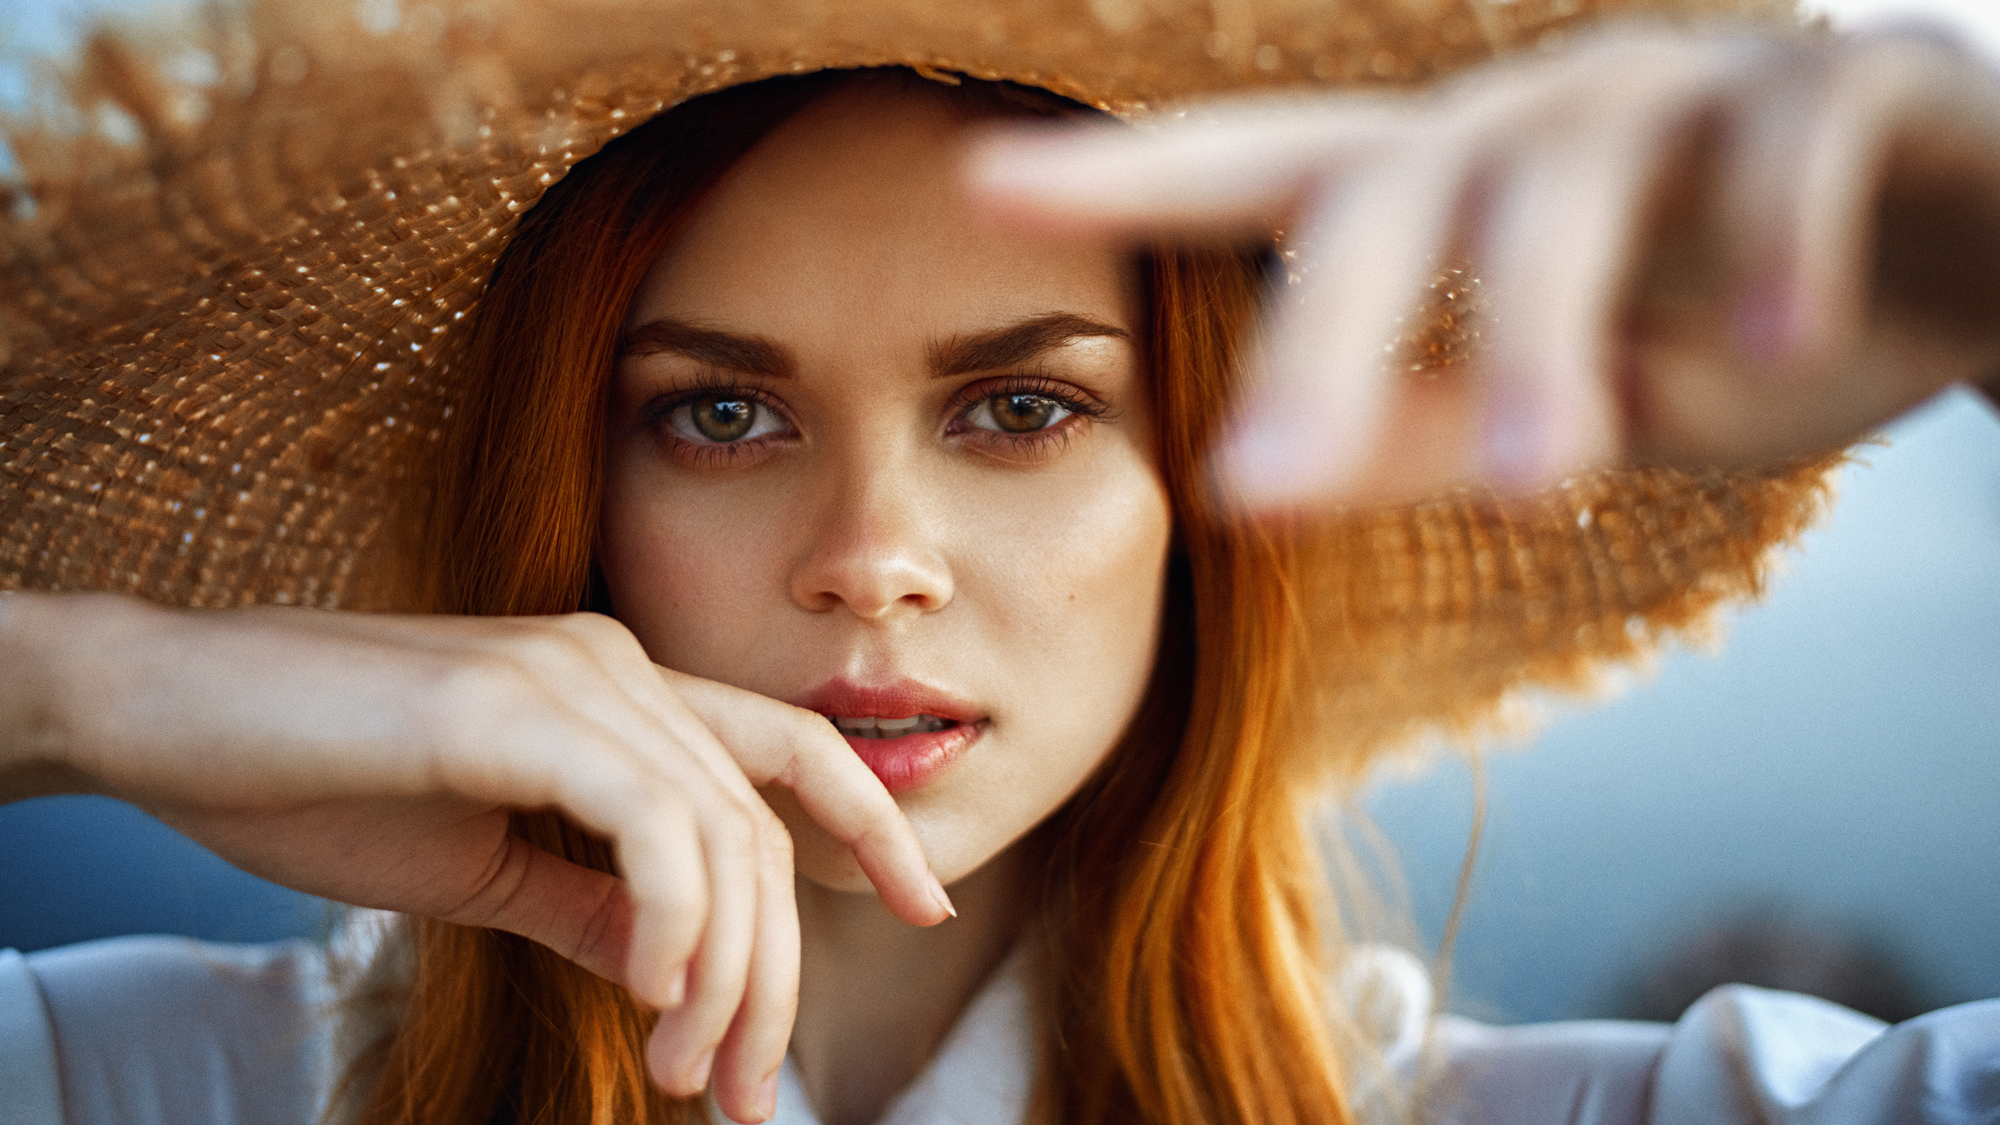 Women Model Looking At Viewer Face Portrait Women With Hats Straw Hat Millinery Touching Face Depth  2000x1125